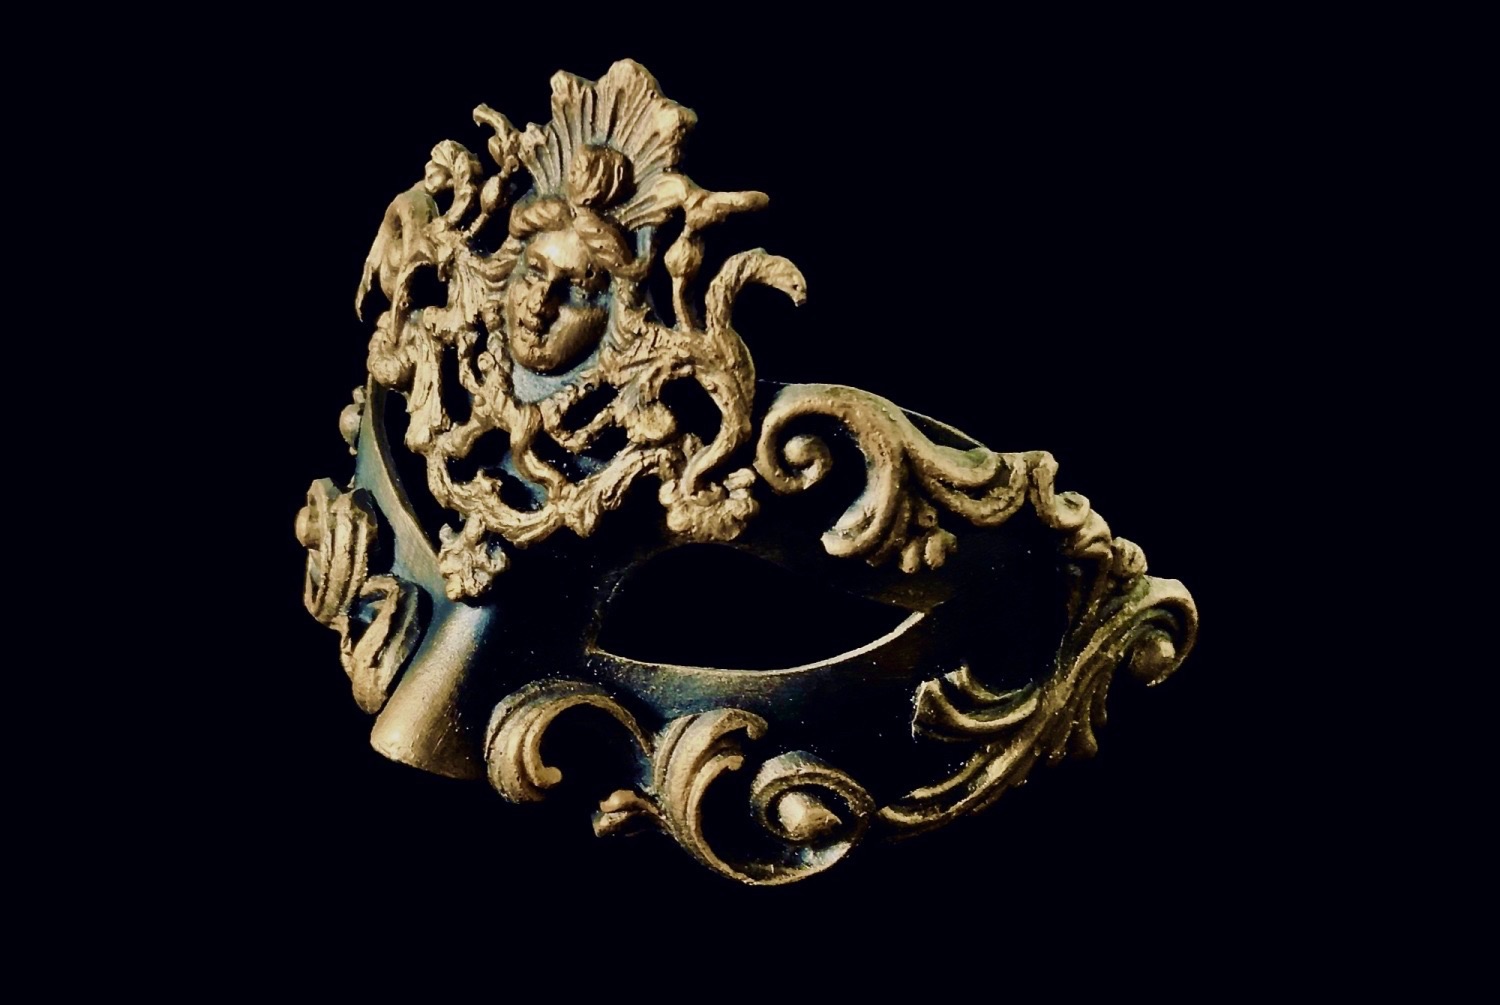 A Luxury Venetian Masquerade Ball Mask in a stunning gold colour